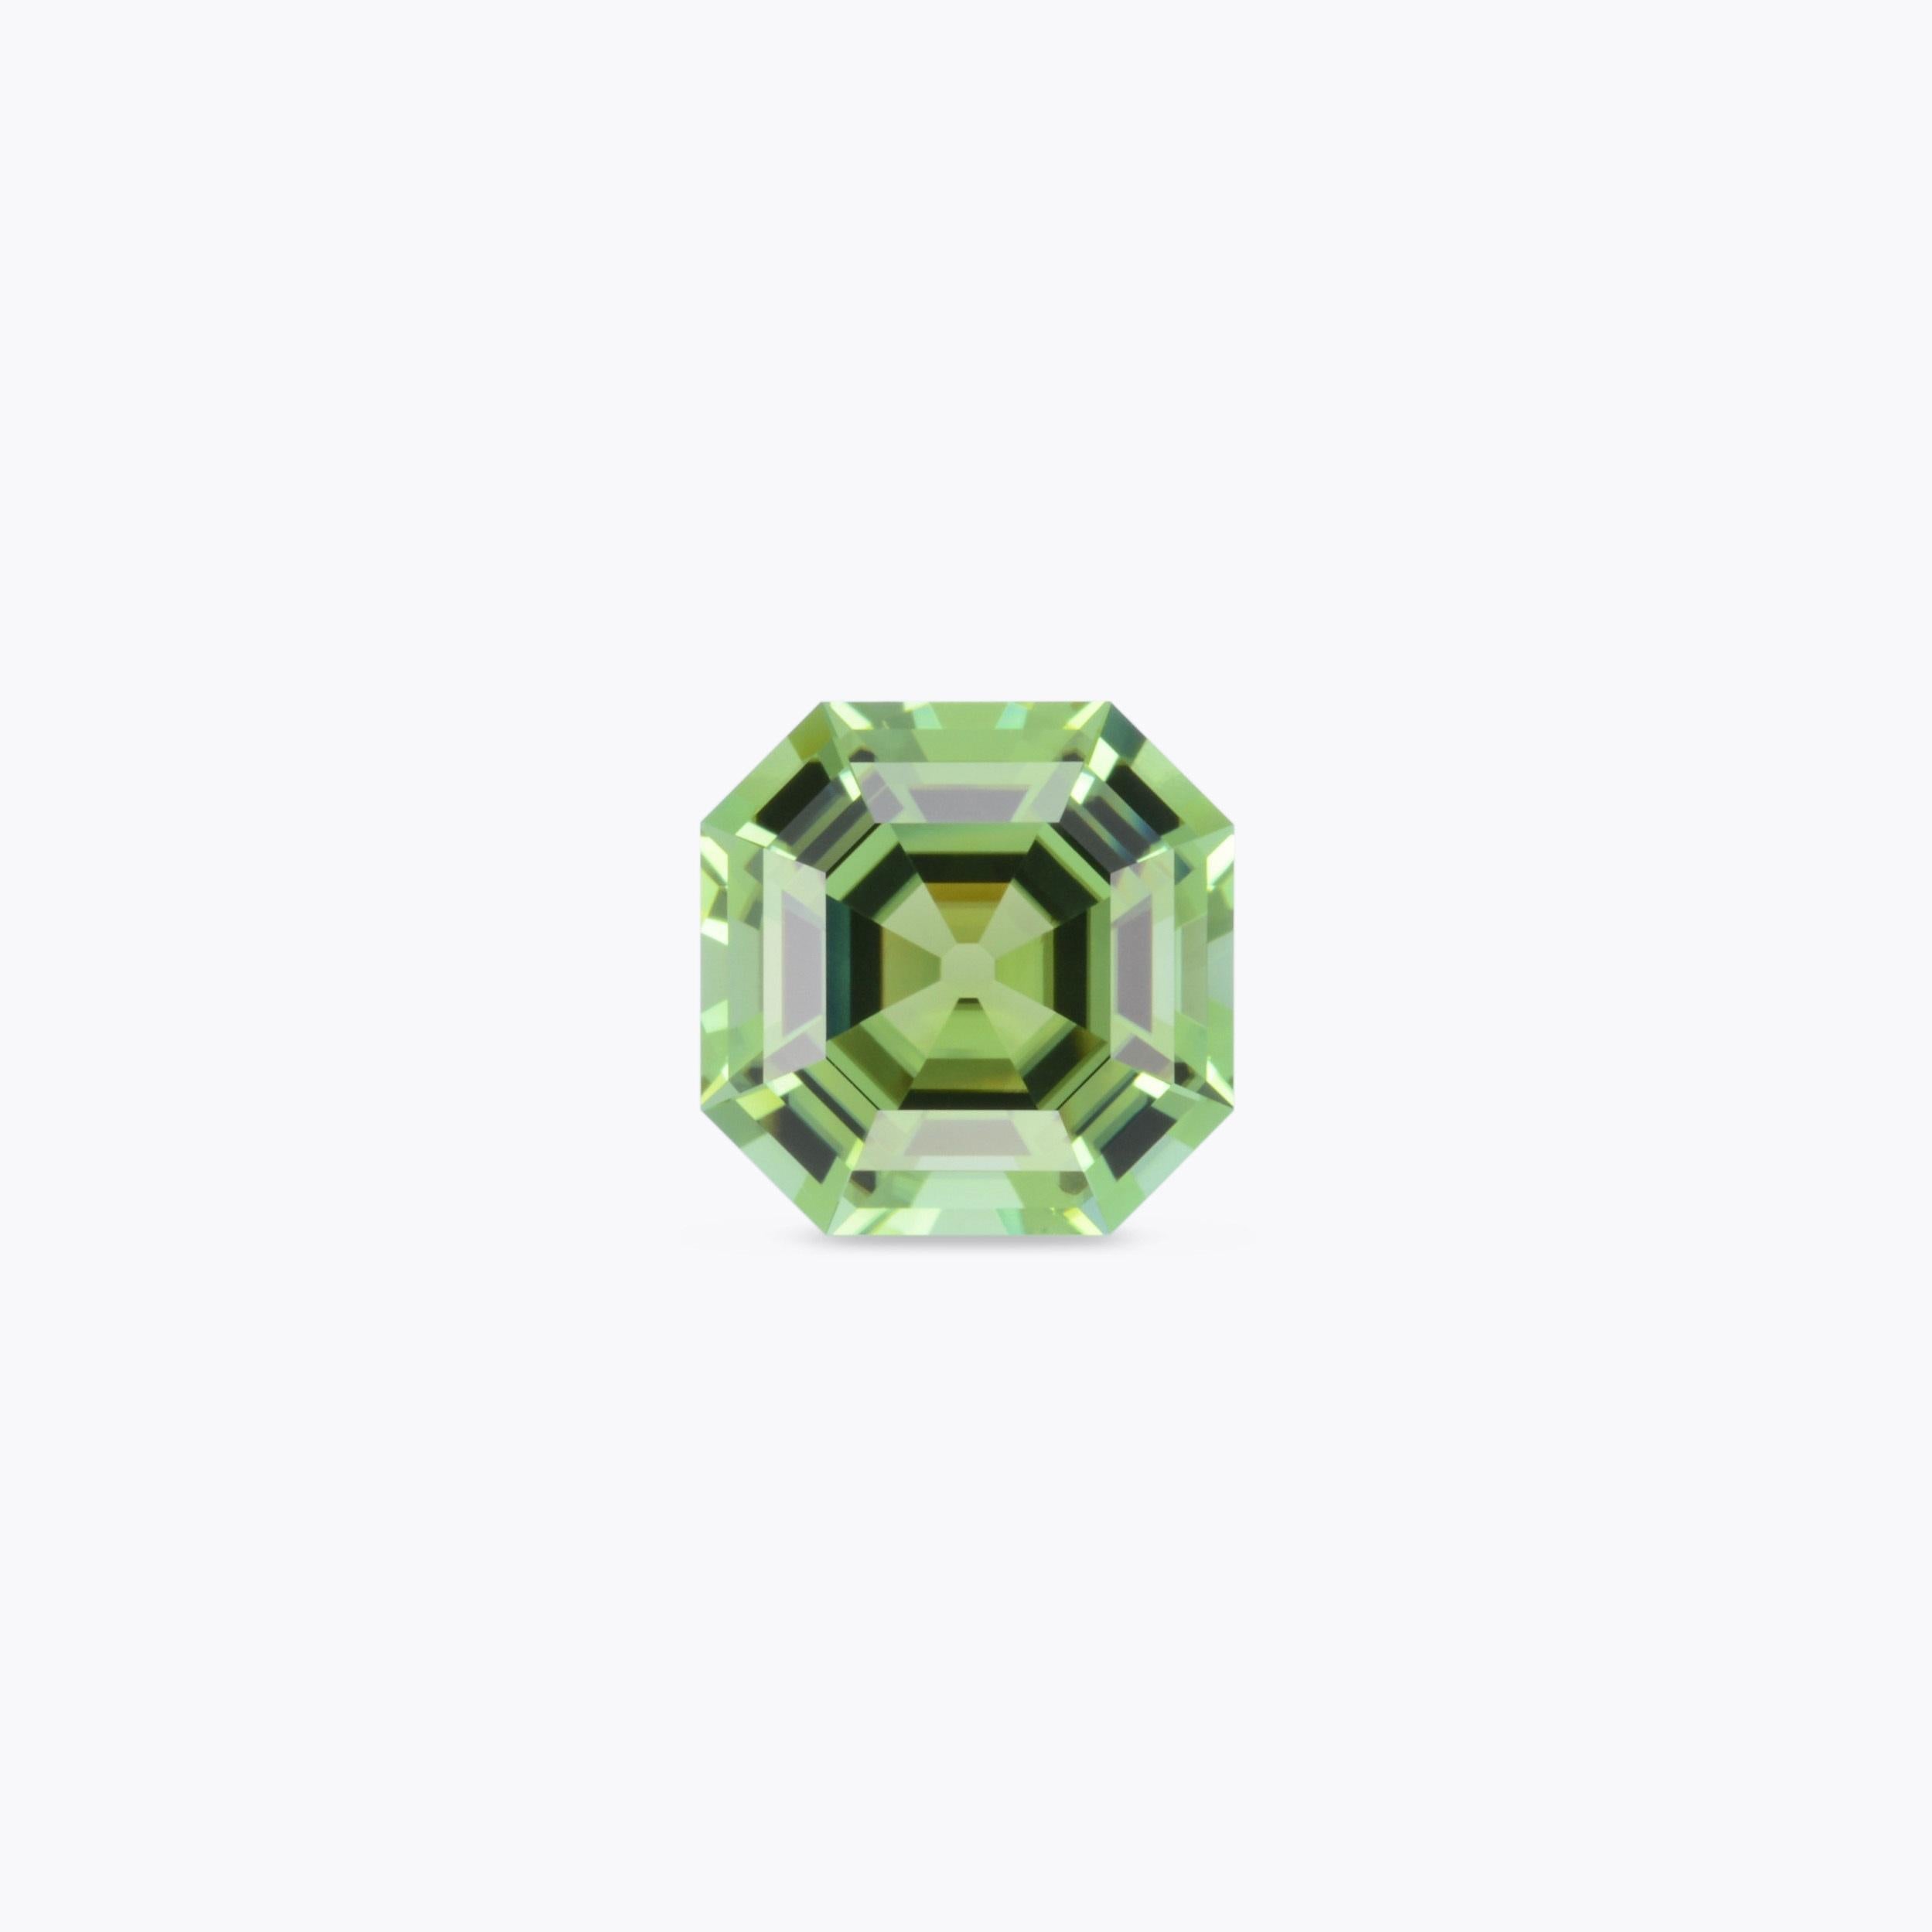 Remarkable 7.47 carat Mint Green Tourmaline Asscher cut (square octagon) gem, offered loose to a lady or a gentleman.
Returns are accepted and paid by us within 7 days of delivery.
We offer supreme custom jewelry work upon request. Please contact us